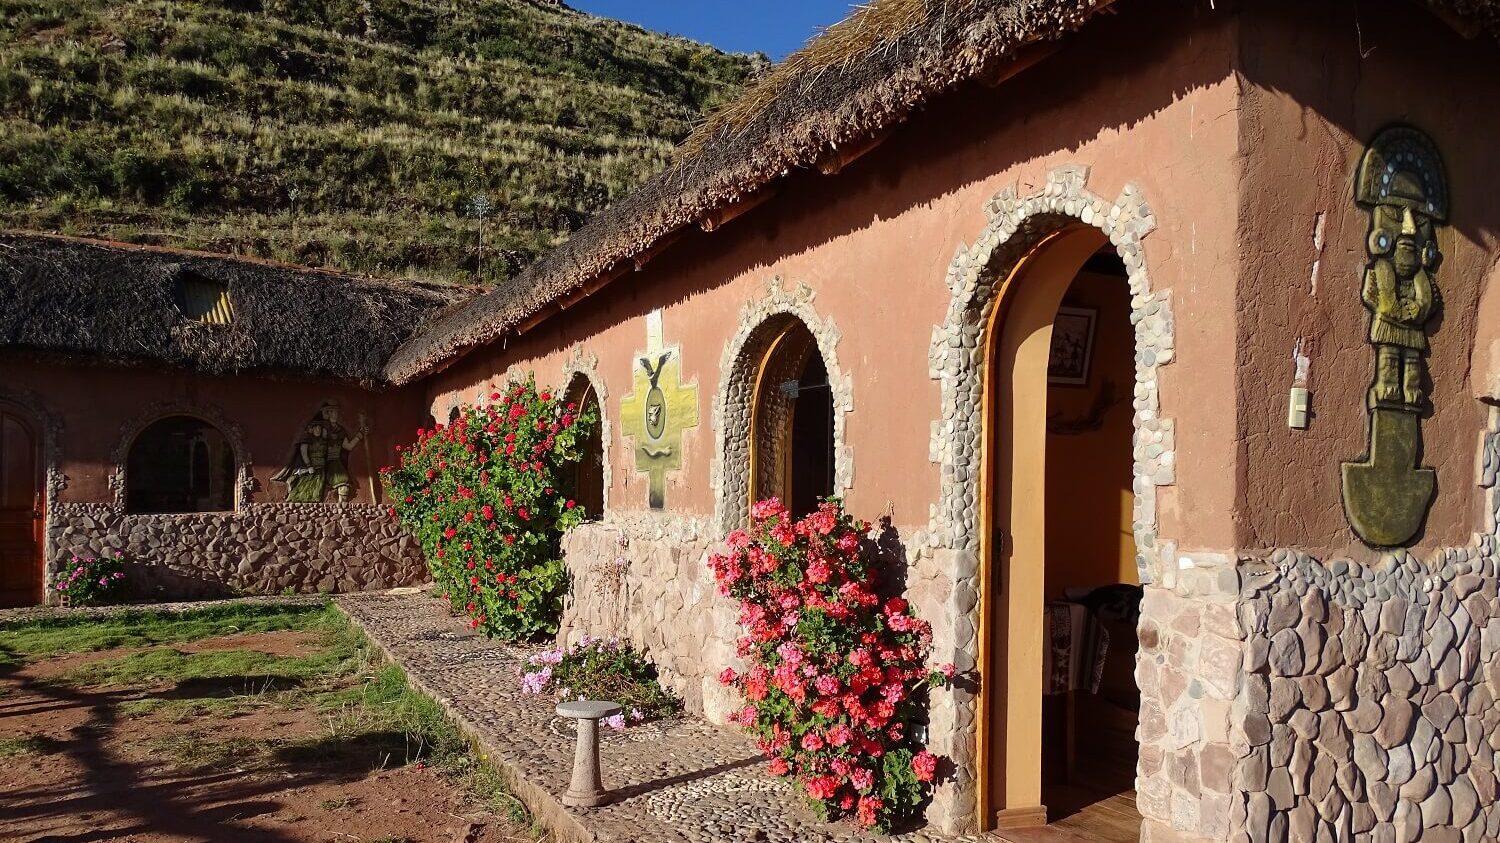 Inti Wasi homestay at Capachica peninsula, part of the community-based tourism offer by RESPONSible Travel Peru